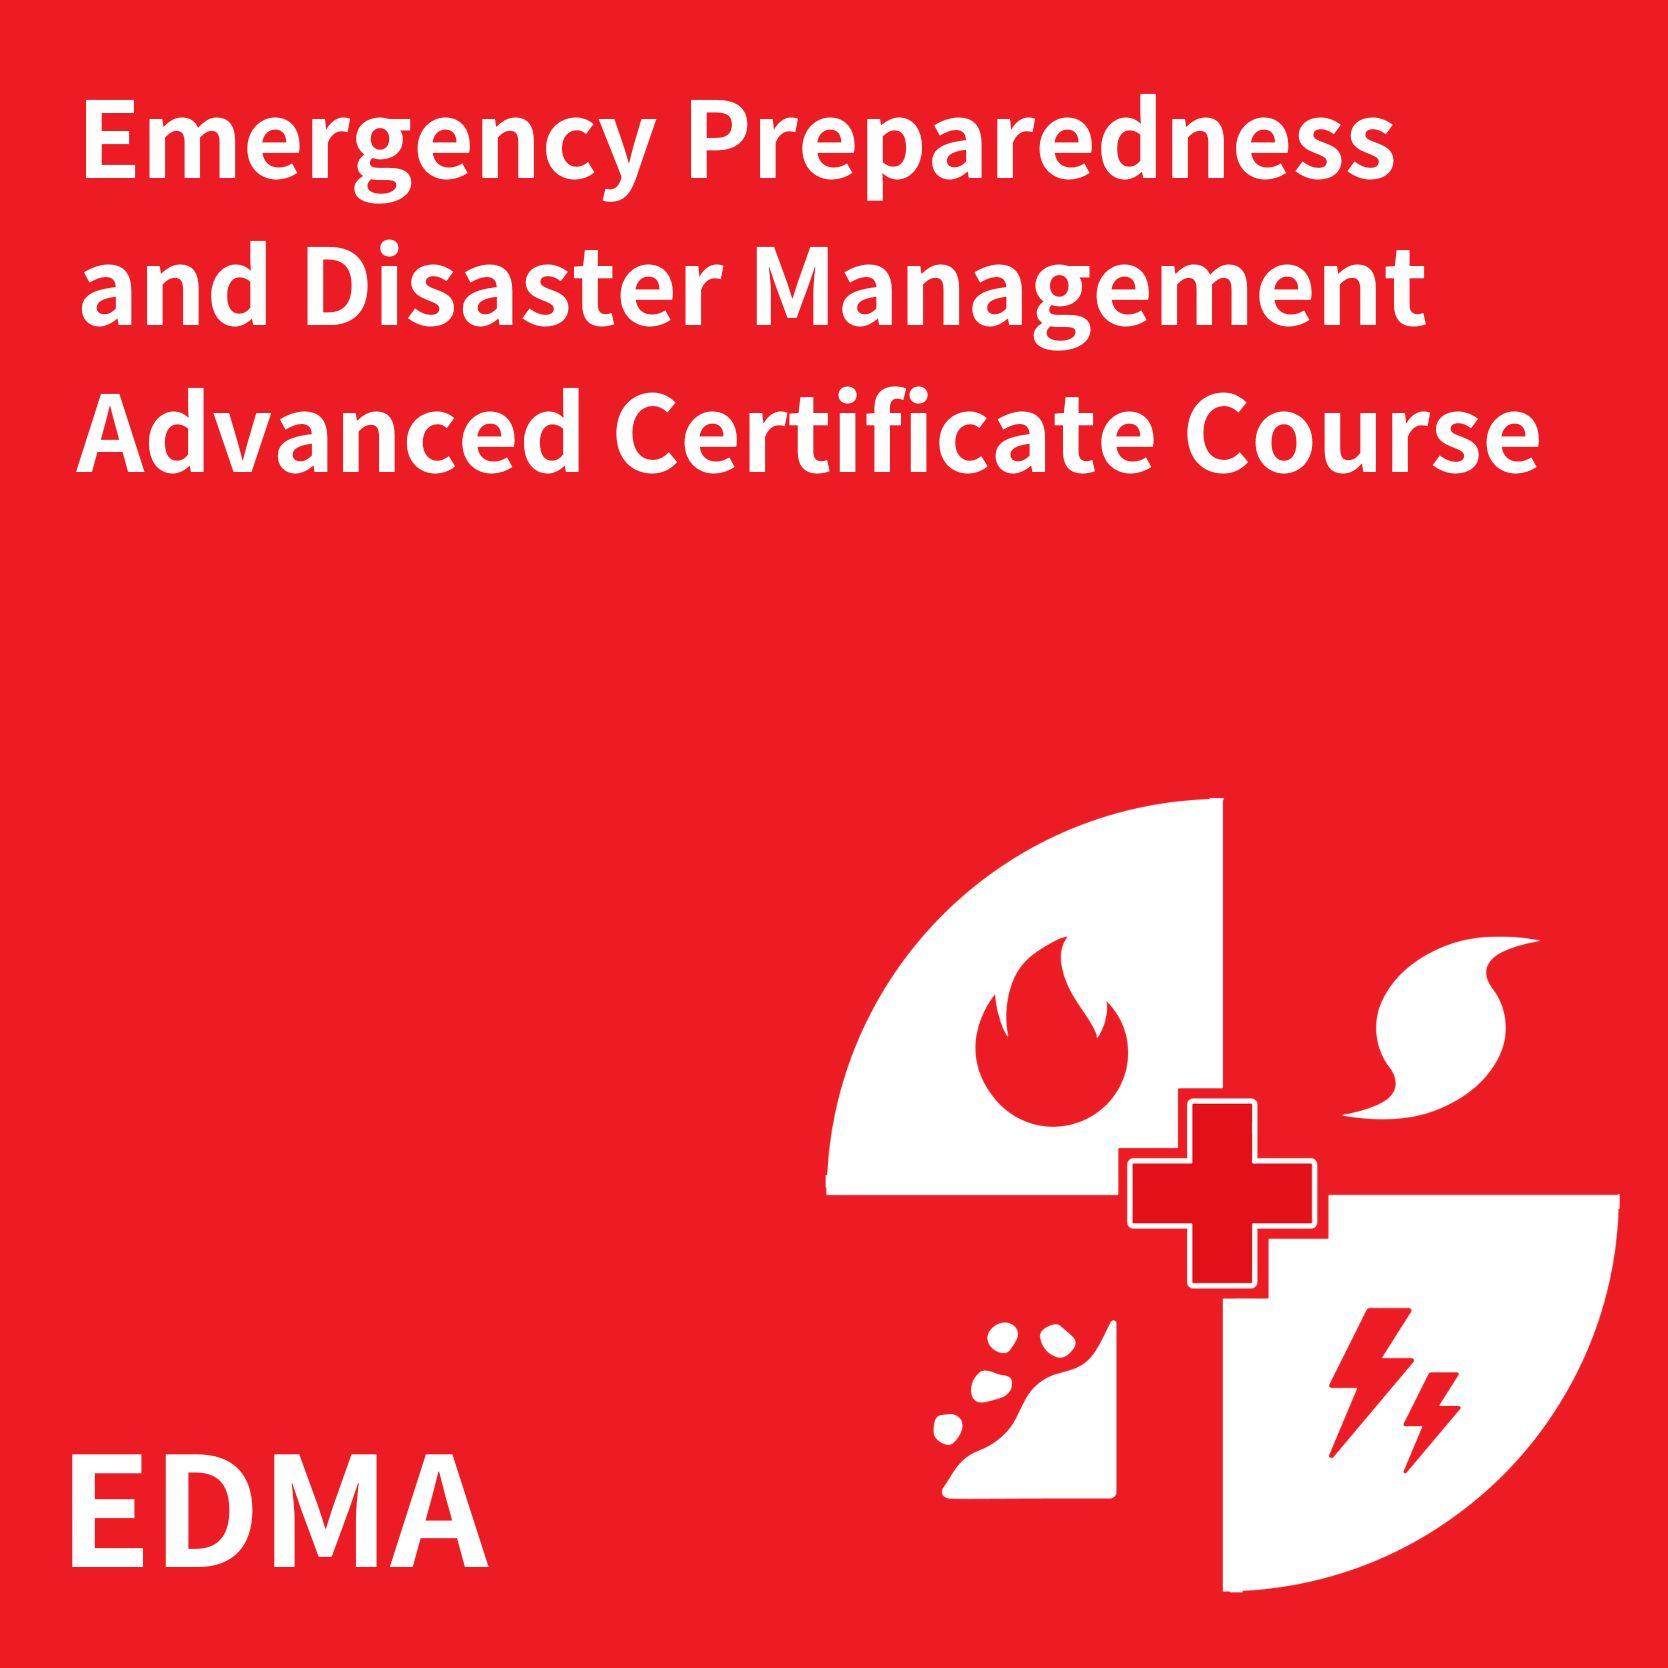 Emergency Preparedness and Disaster Management Advanced Certificate Course